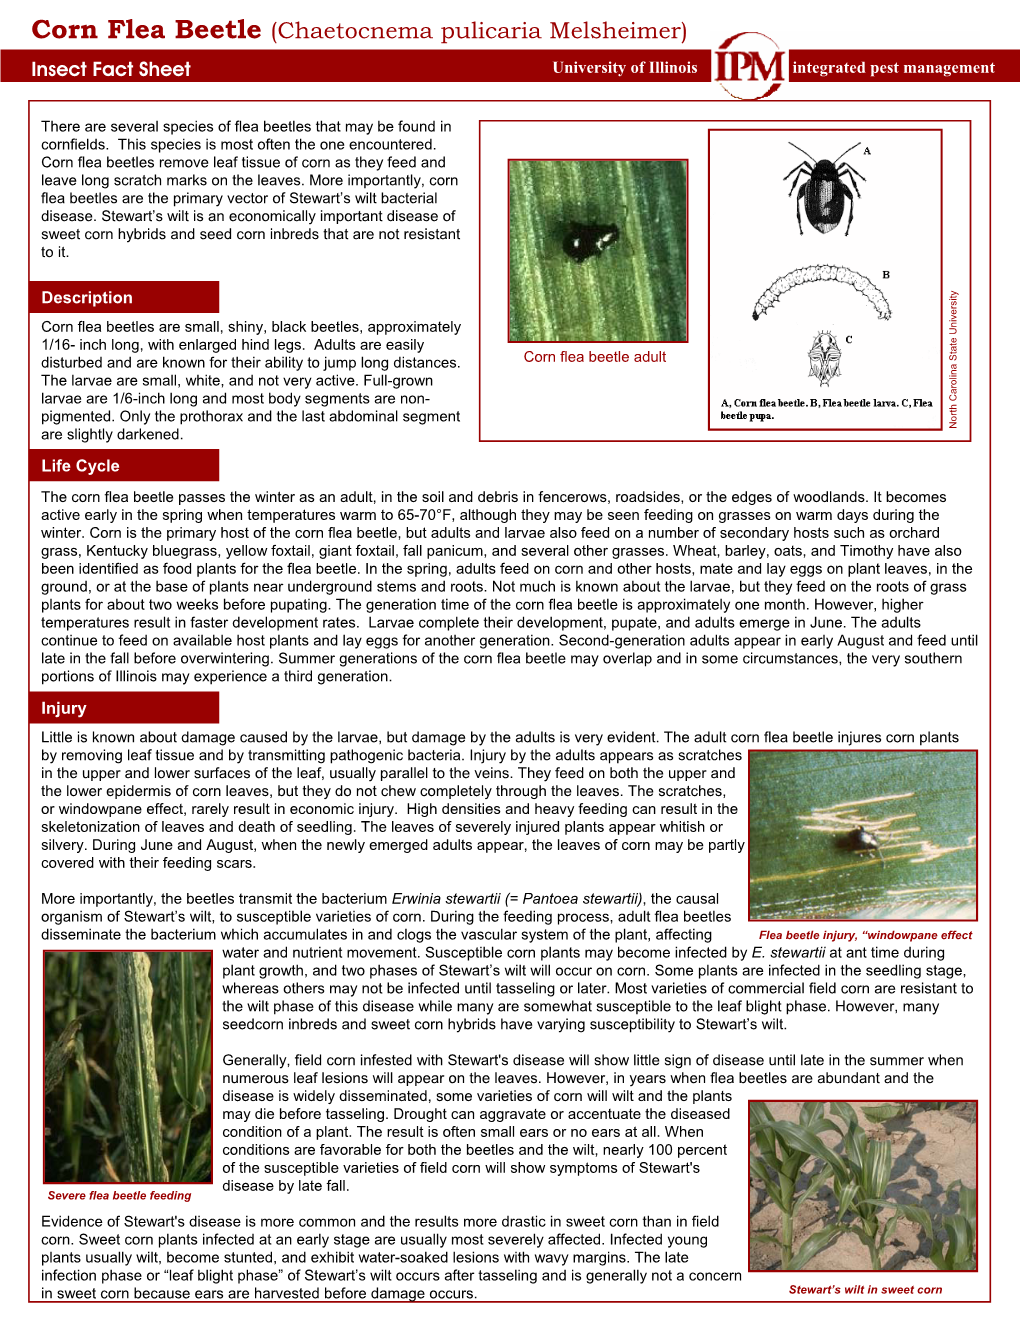 Corn Flea Beetle (Chaetocnema Pulicaria Melsheimer) Insect Fact Sheet University of Illinois Integrated Pest Management